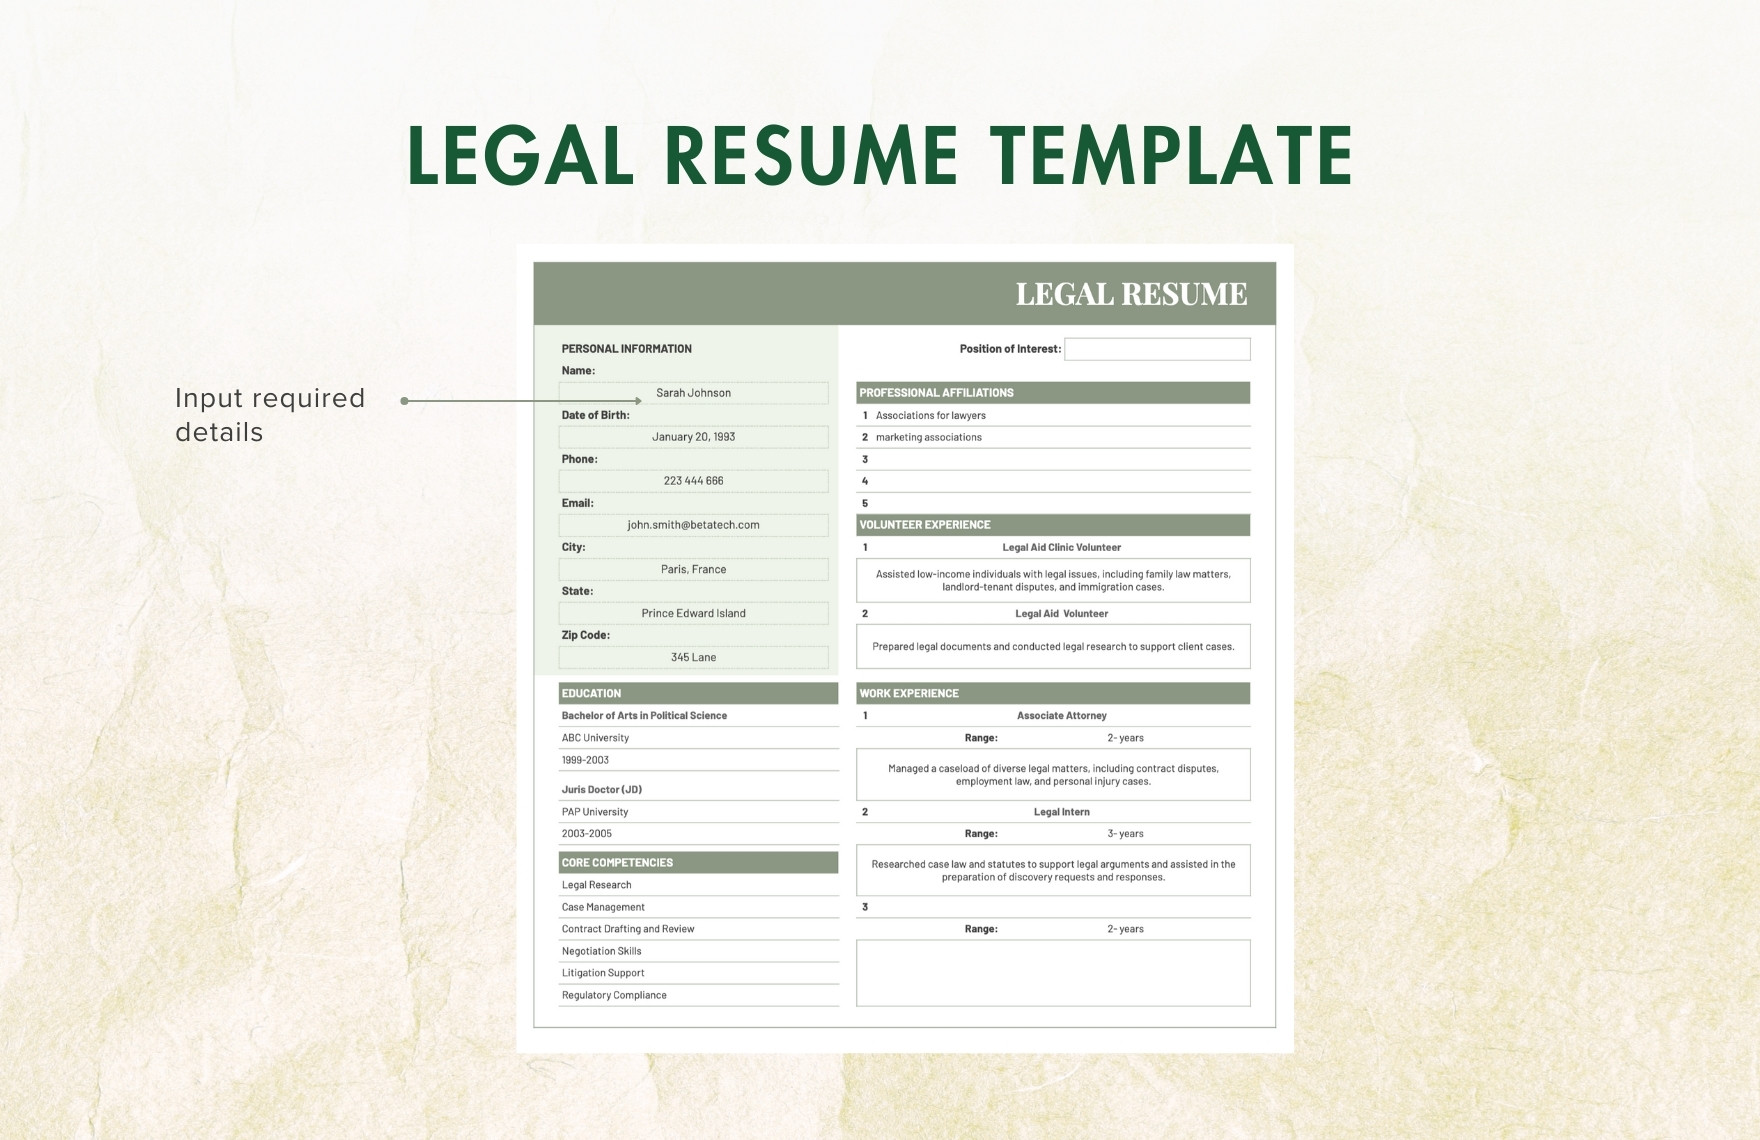 Legal Resume Template